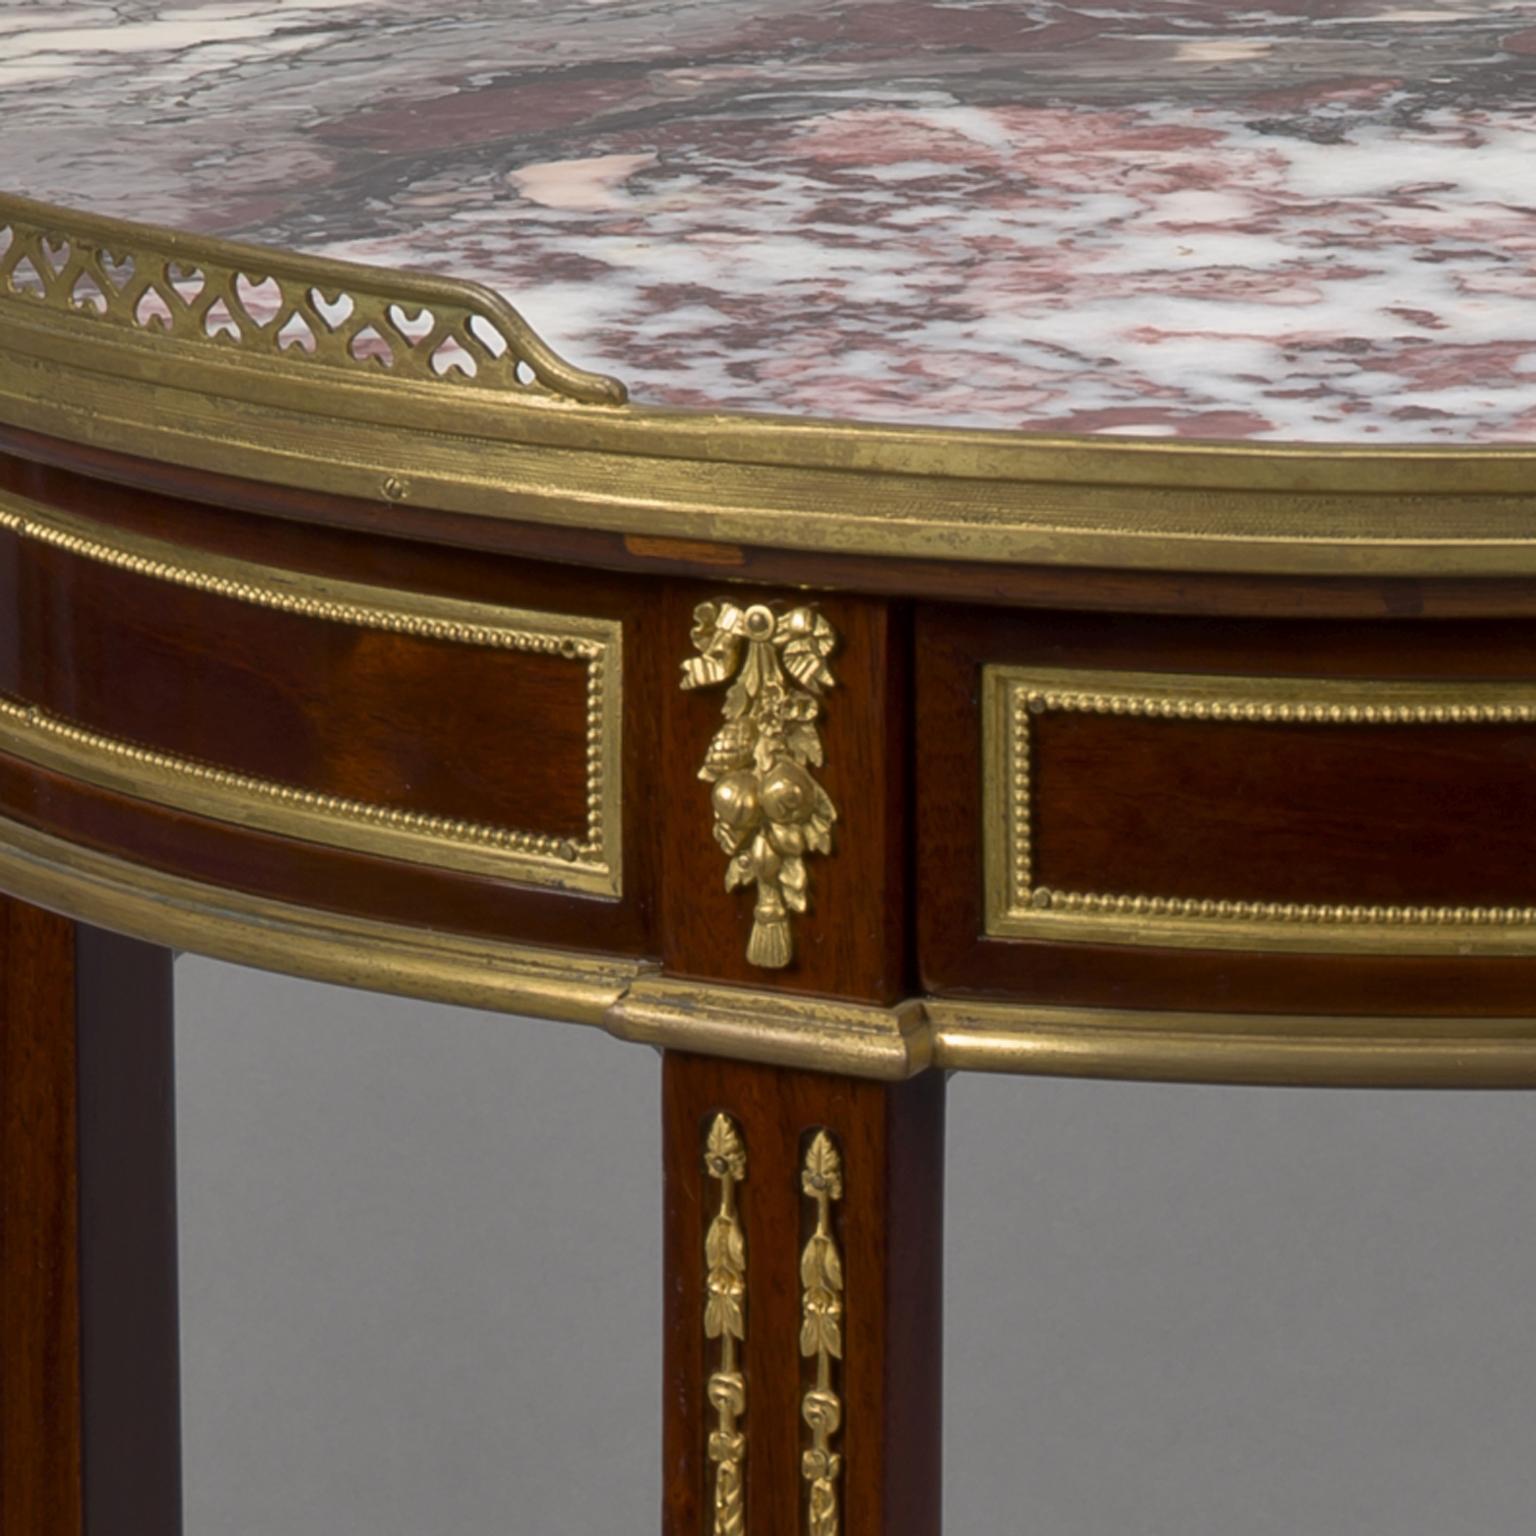 A fine transitional style gilt bronze mounted guéridon with a Breccia marble top, by Maison Millet.

The reverse of the gilt bronze stamped 'MB' for Maison Millet.

The table has a circular marble top within a pierced gallery above a frieze